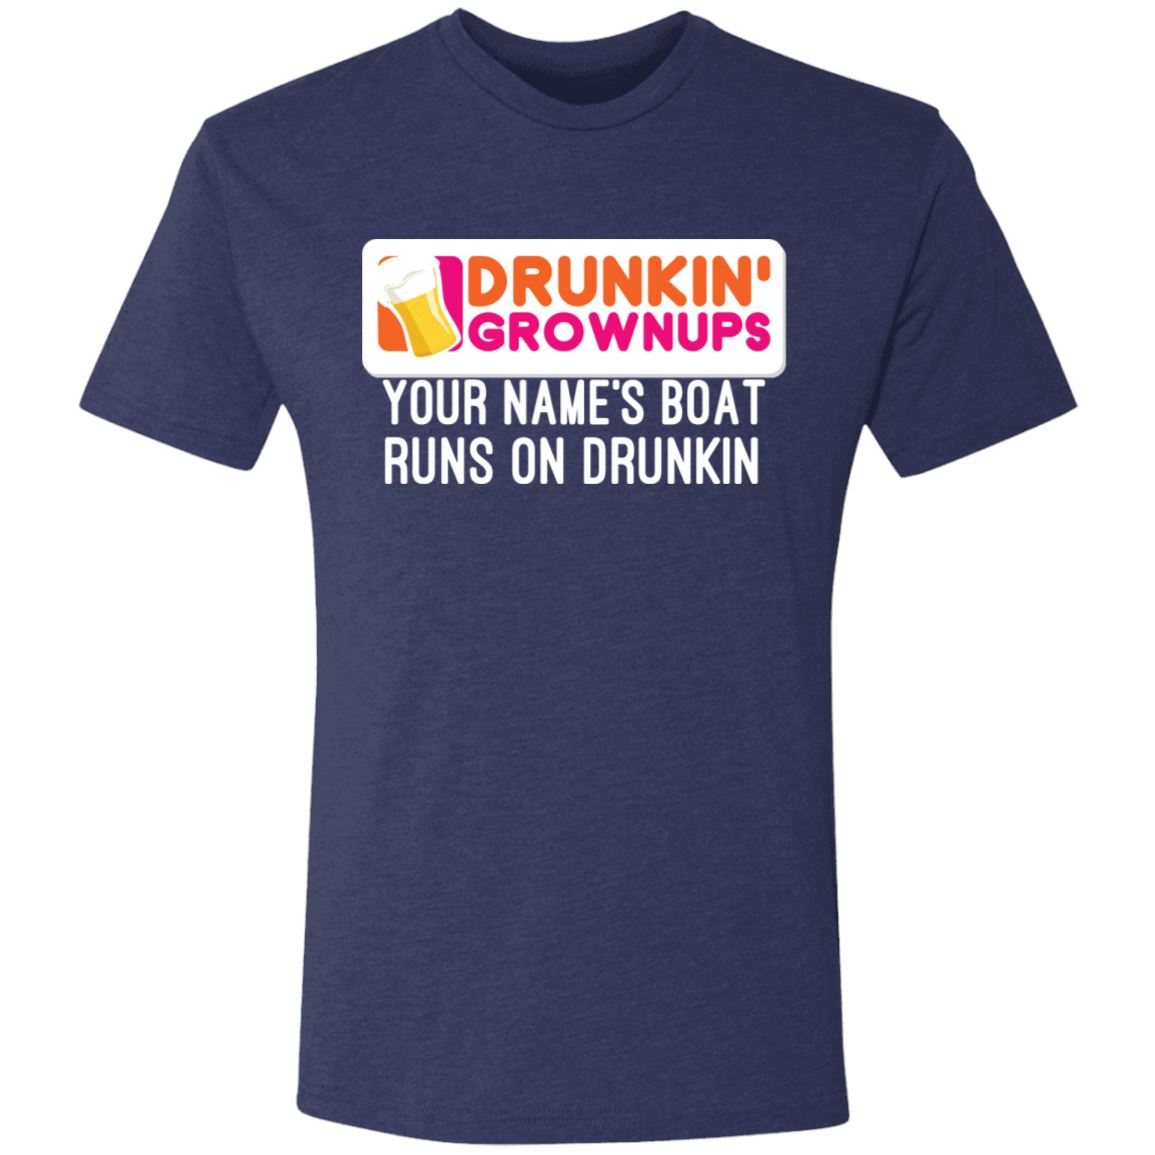 Drunkin Grownups PERSONALIZED Men's and Women's T-Shirts Apparel NL6010 Men's Triblend T-Shirt Vintage Navy S